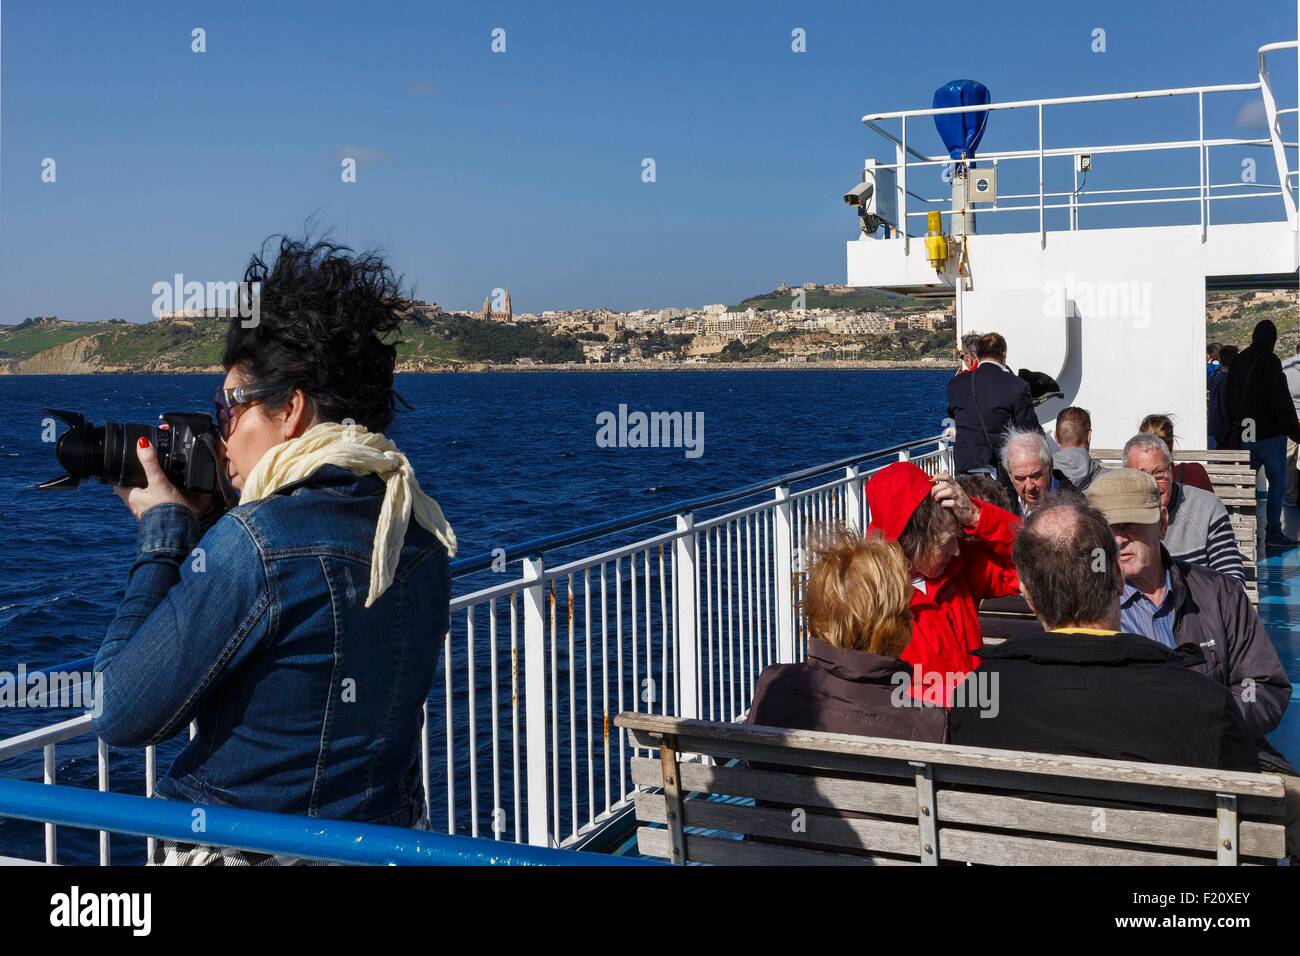 Malta, Gozo, passengers on the deck of a ferry approaching the Mgarr harbour Stock Photo